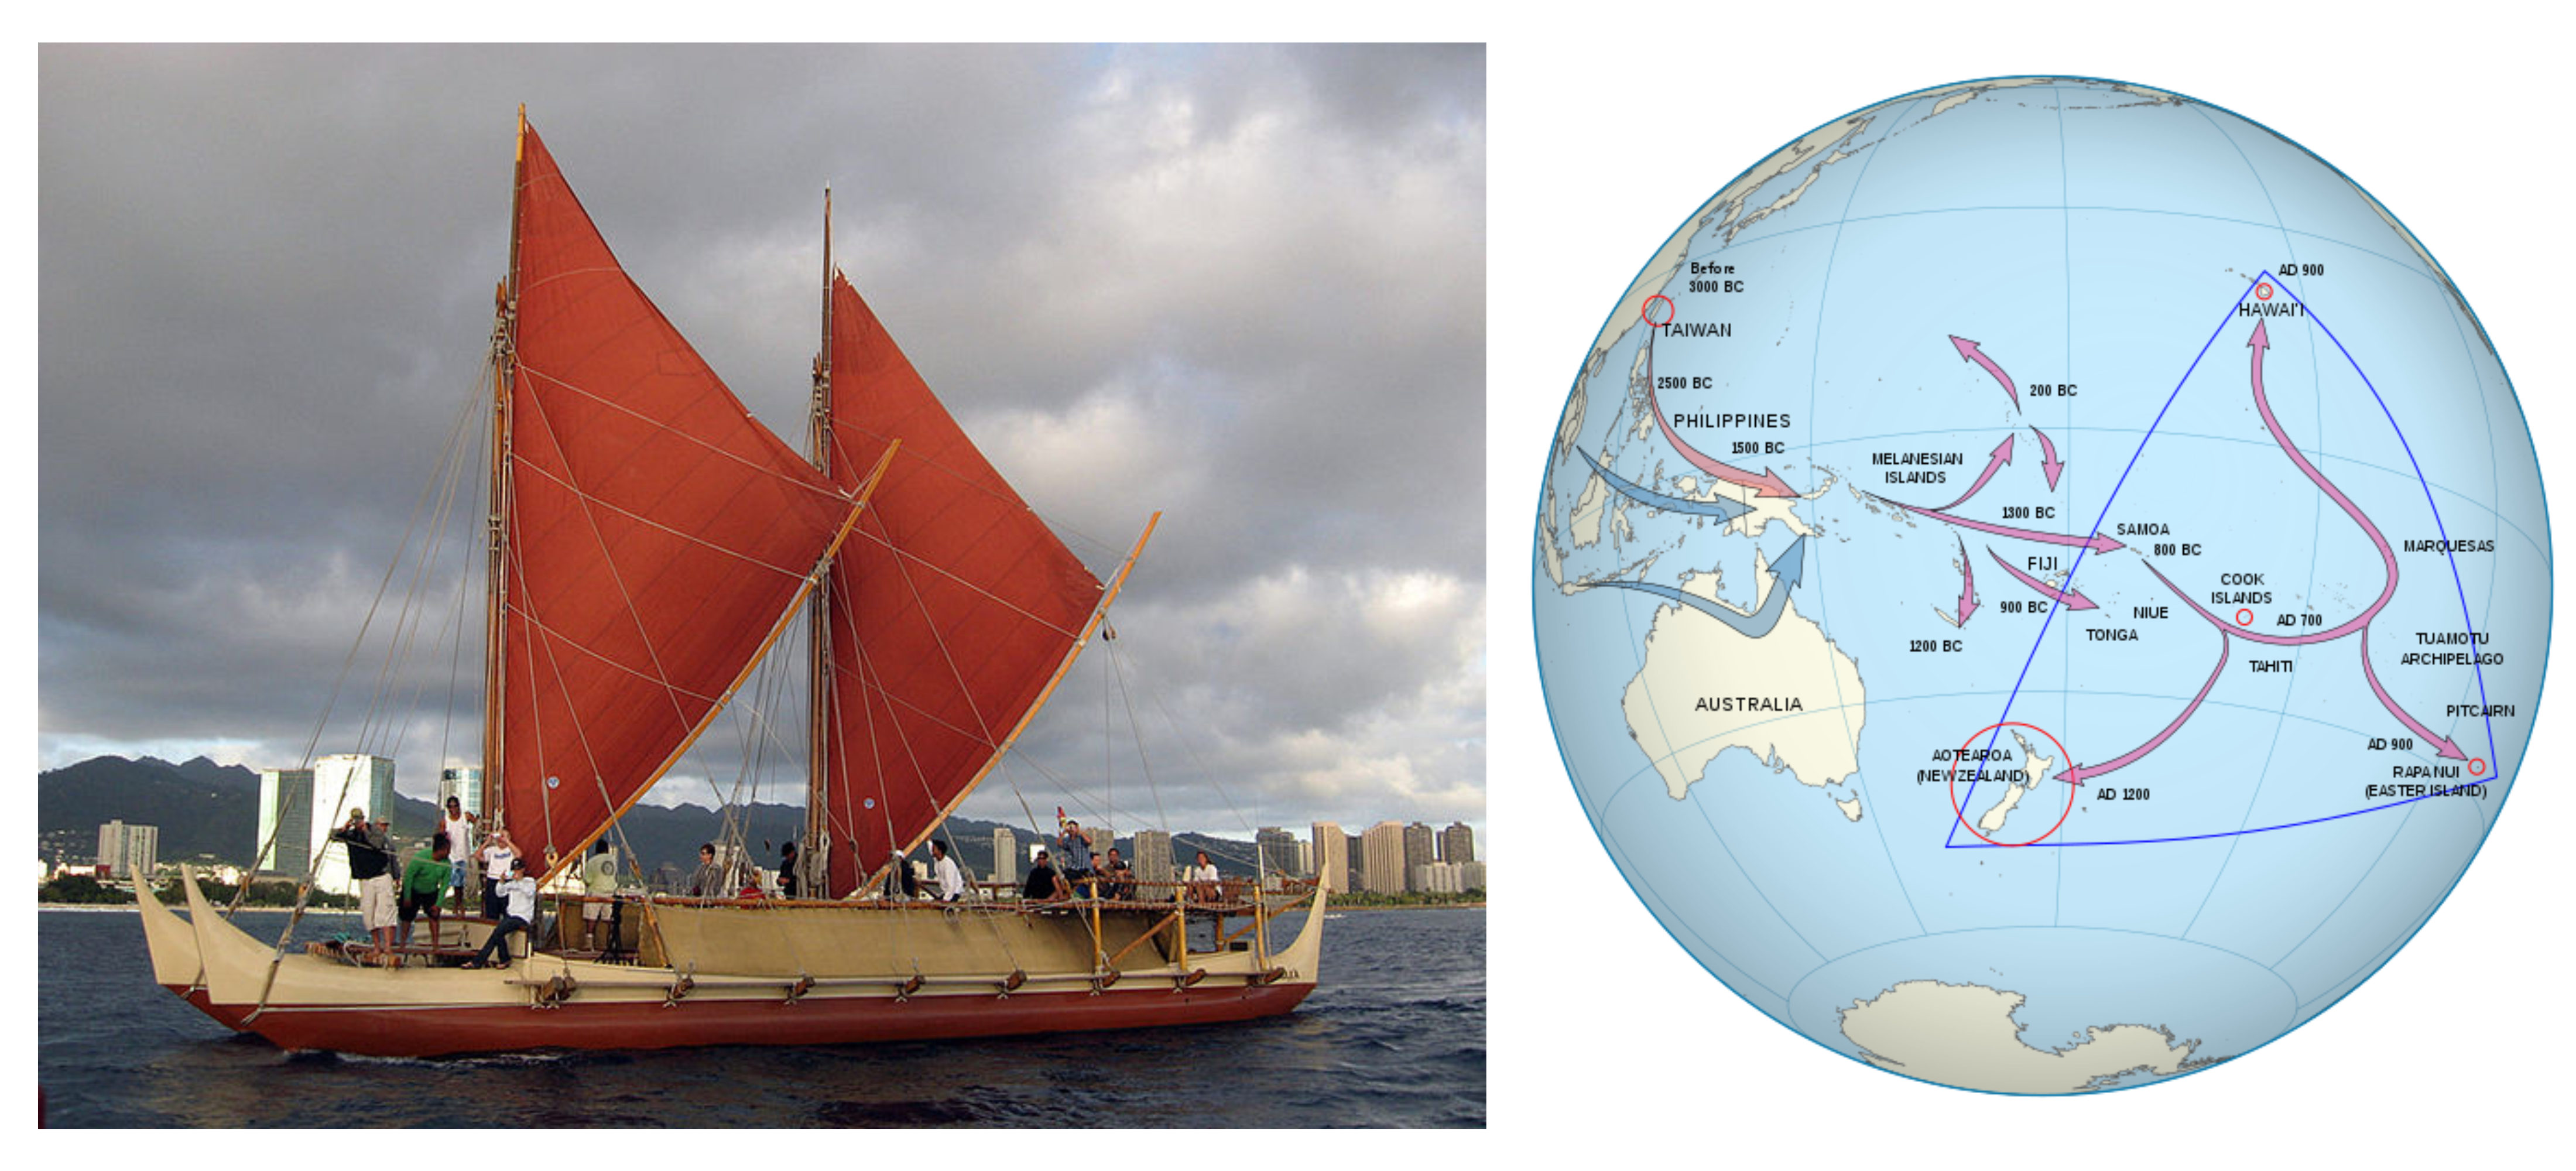 People aboard Hokule'a double-hulled canoe with two masts; map of sailing routes from Southeast Asia to South Pacific